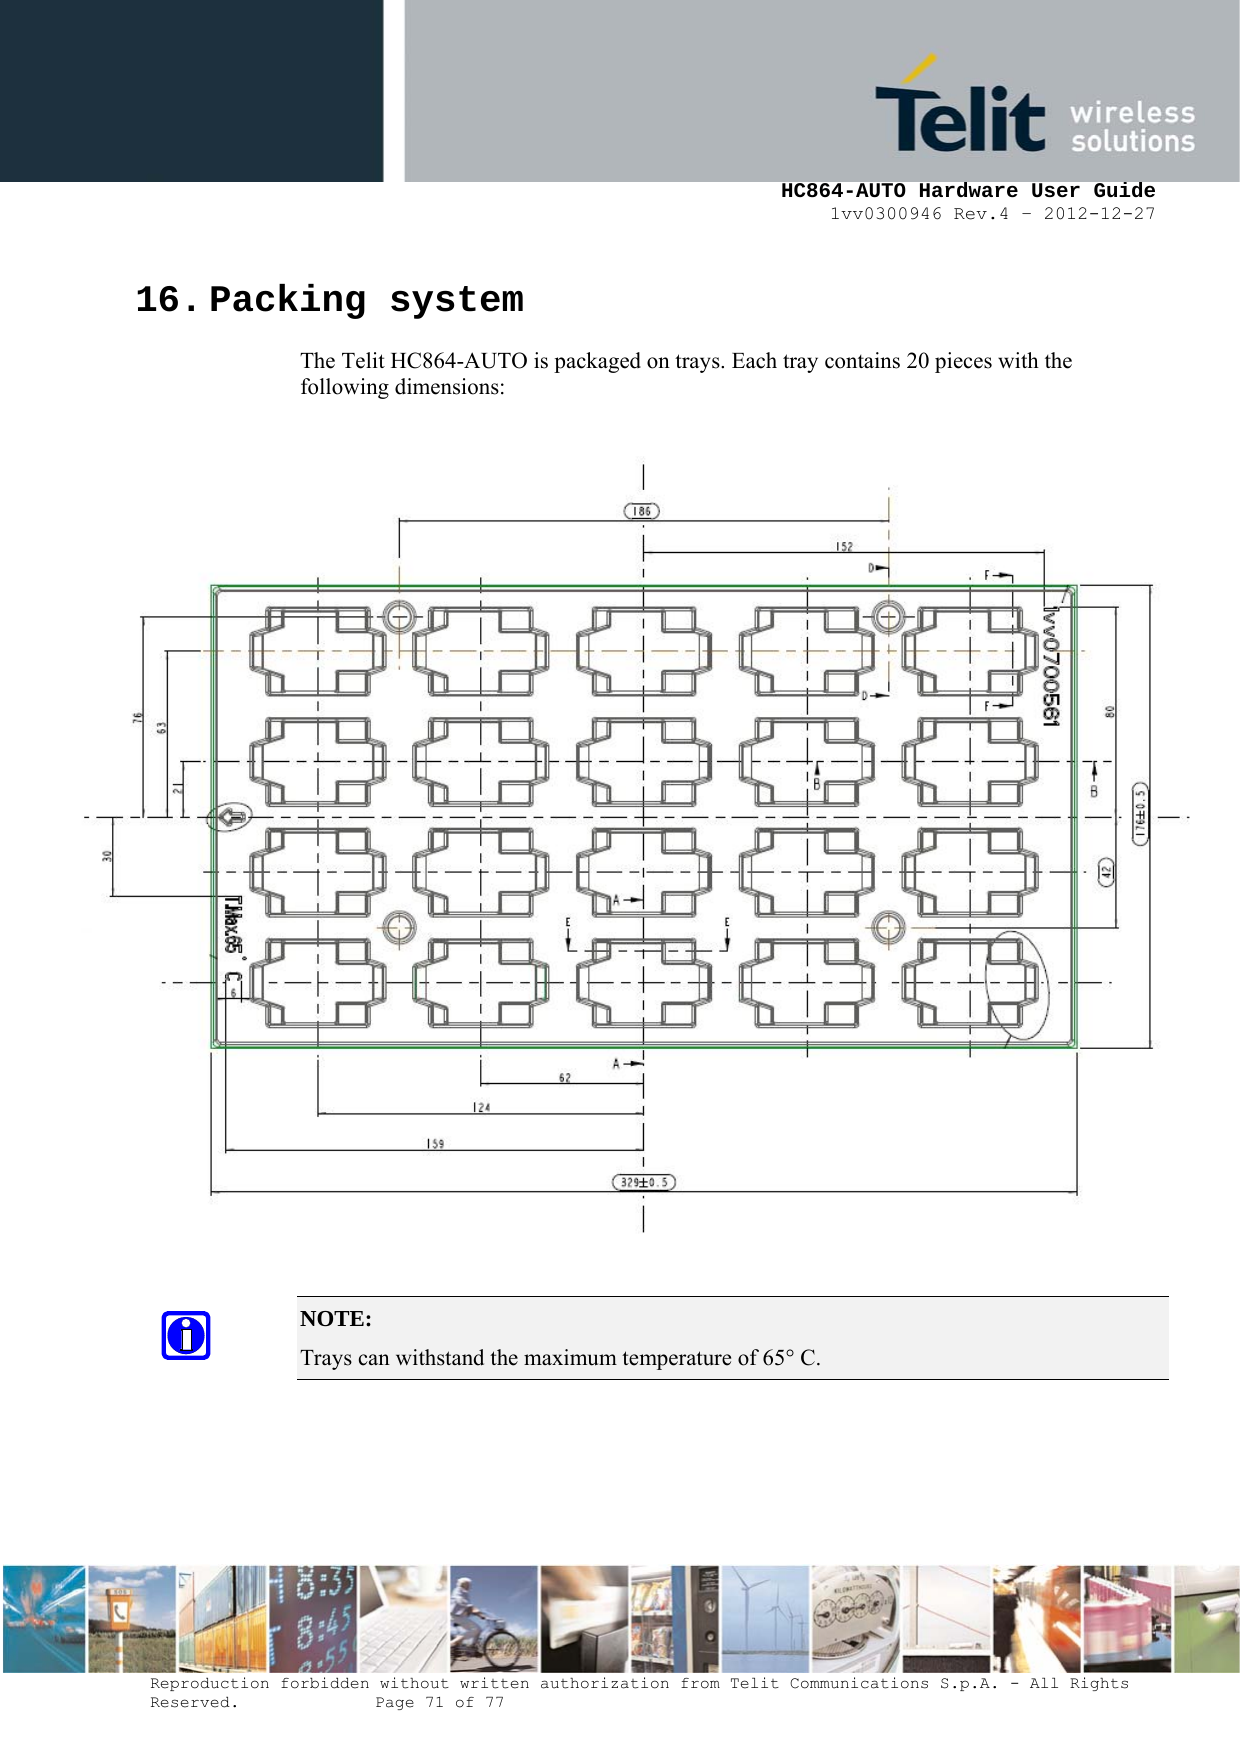     HC864-AUTO Hardware User Guide 1vv0300946 Rev.4 – 2012-12-27 Reproduction forbidden without written authorization from Telit Communications S.p.A. - All Rights Reserved.    Page 71 of 77  16. Packing system The Telit HC864-AUTO is packaged on trays. Each tray contains 20 pieces with the following dimensions:   NOTE:  Trays can withstand the maximum temperature of 65° C.   